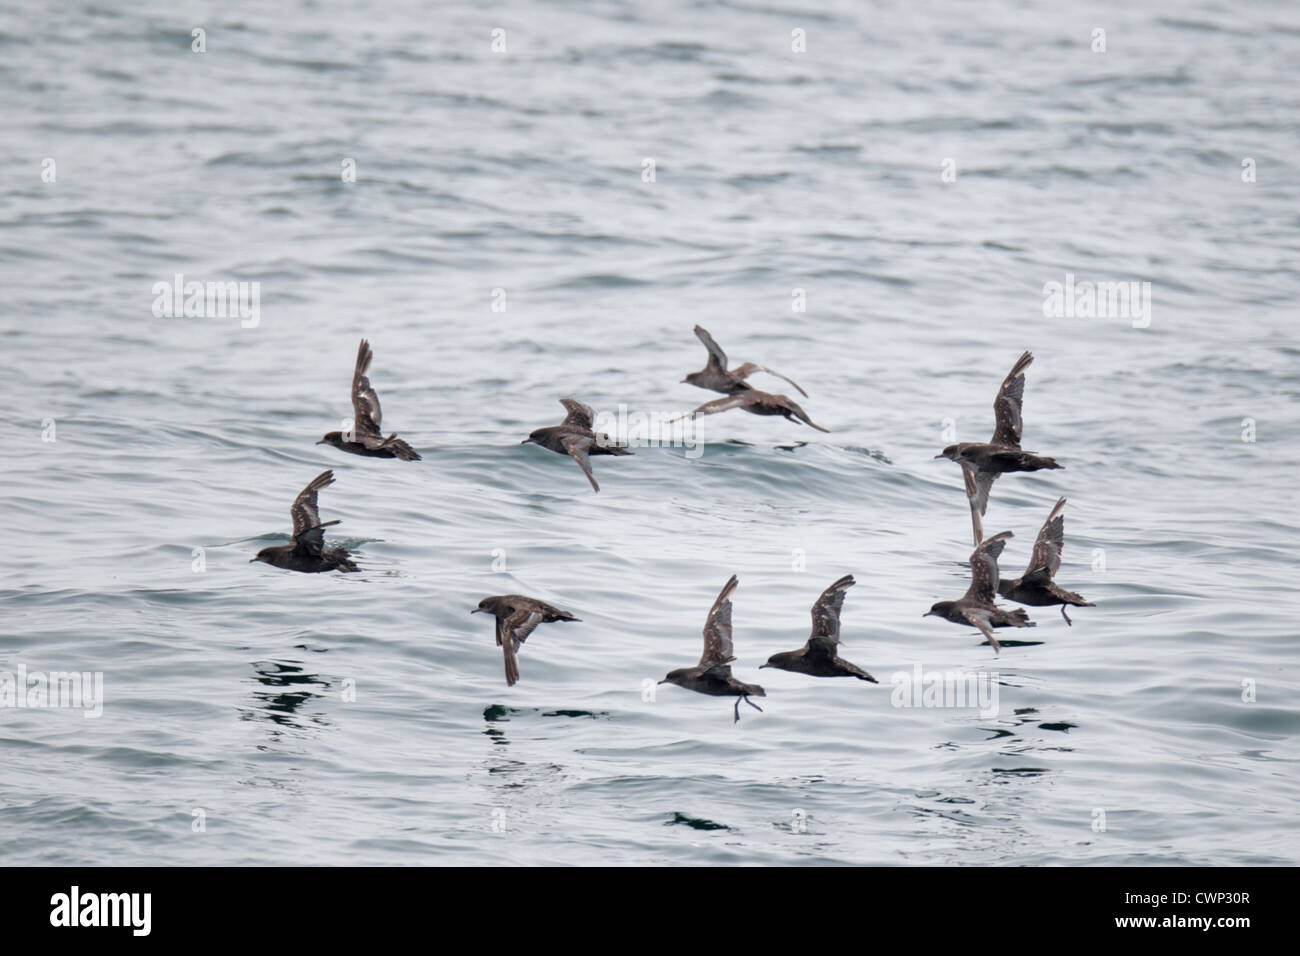 Short-tailed Shearwater (Puffinus tenuirostris) adults, moulting wing feathers, flock in flight over sea, Sea of Okhotsk, Stock Photo